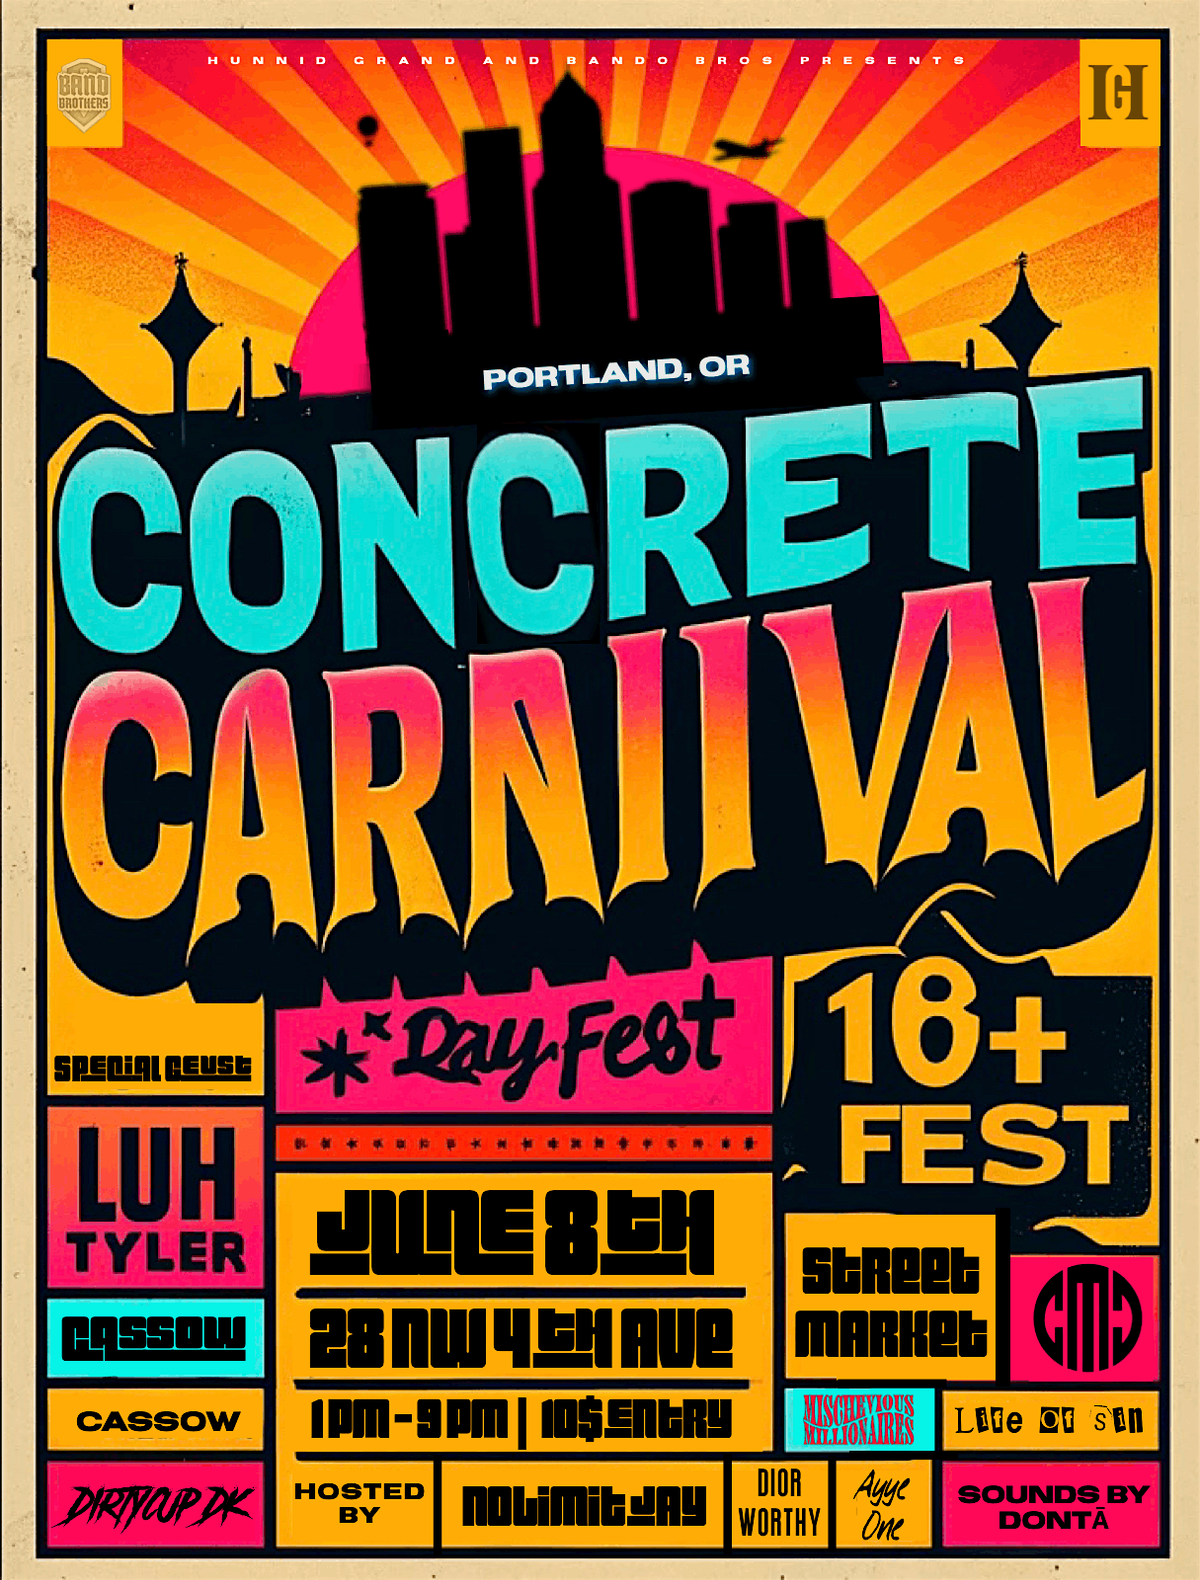 Hunnid Grand & Band O\u2019 Brothers Present : Concrete Carnival Day Fest 18+